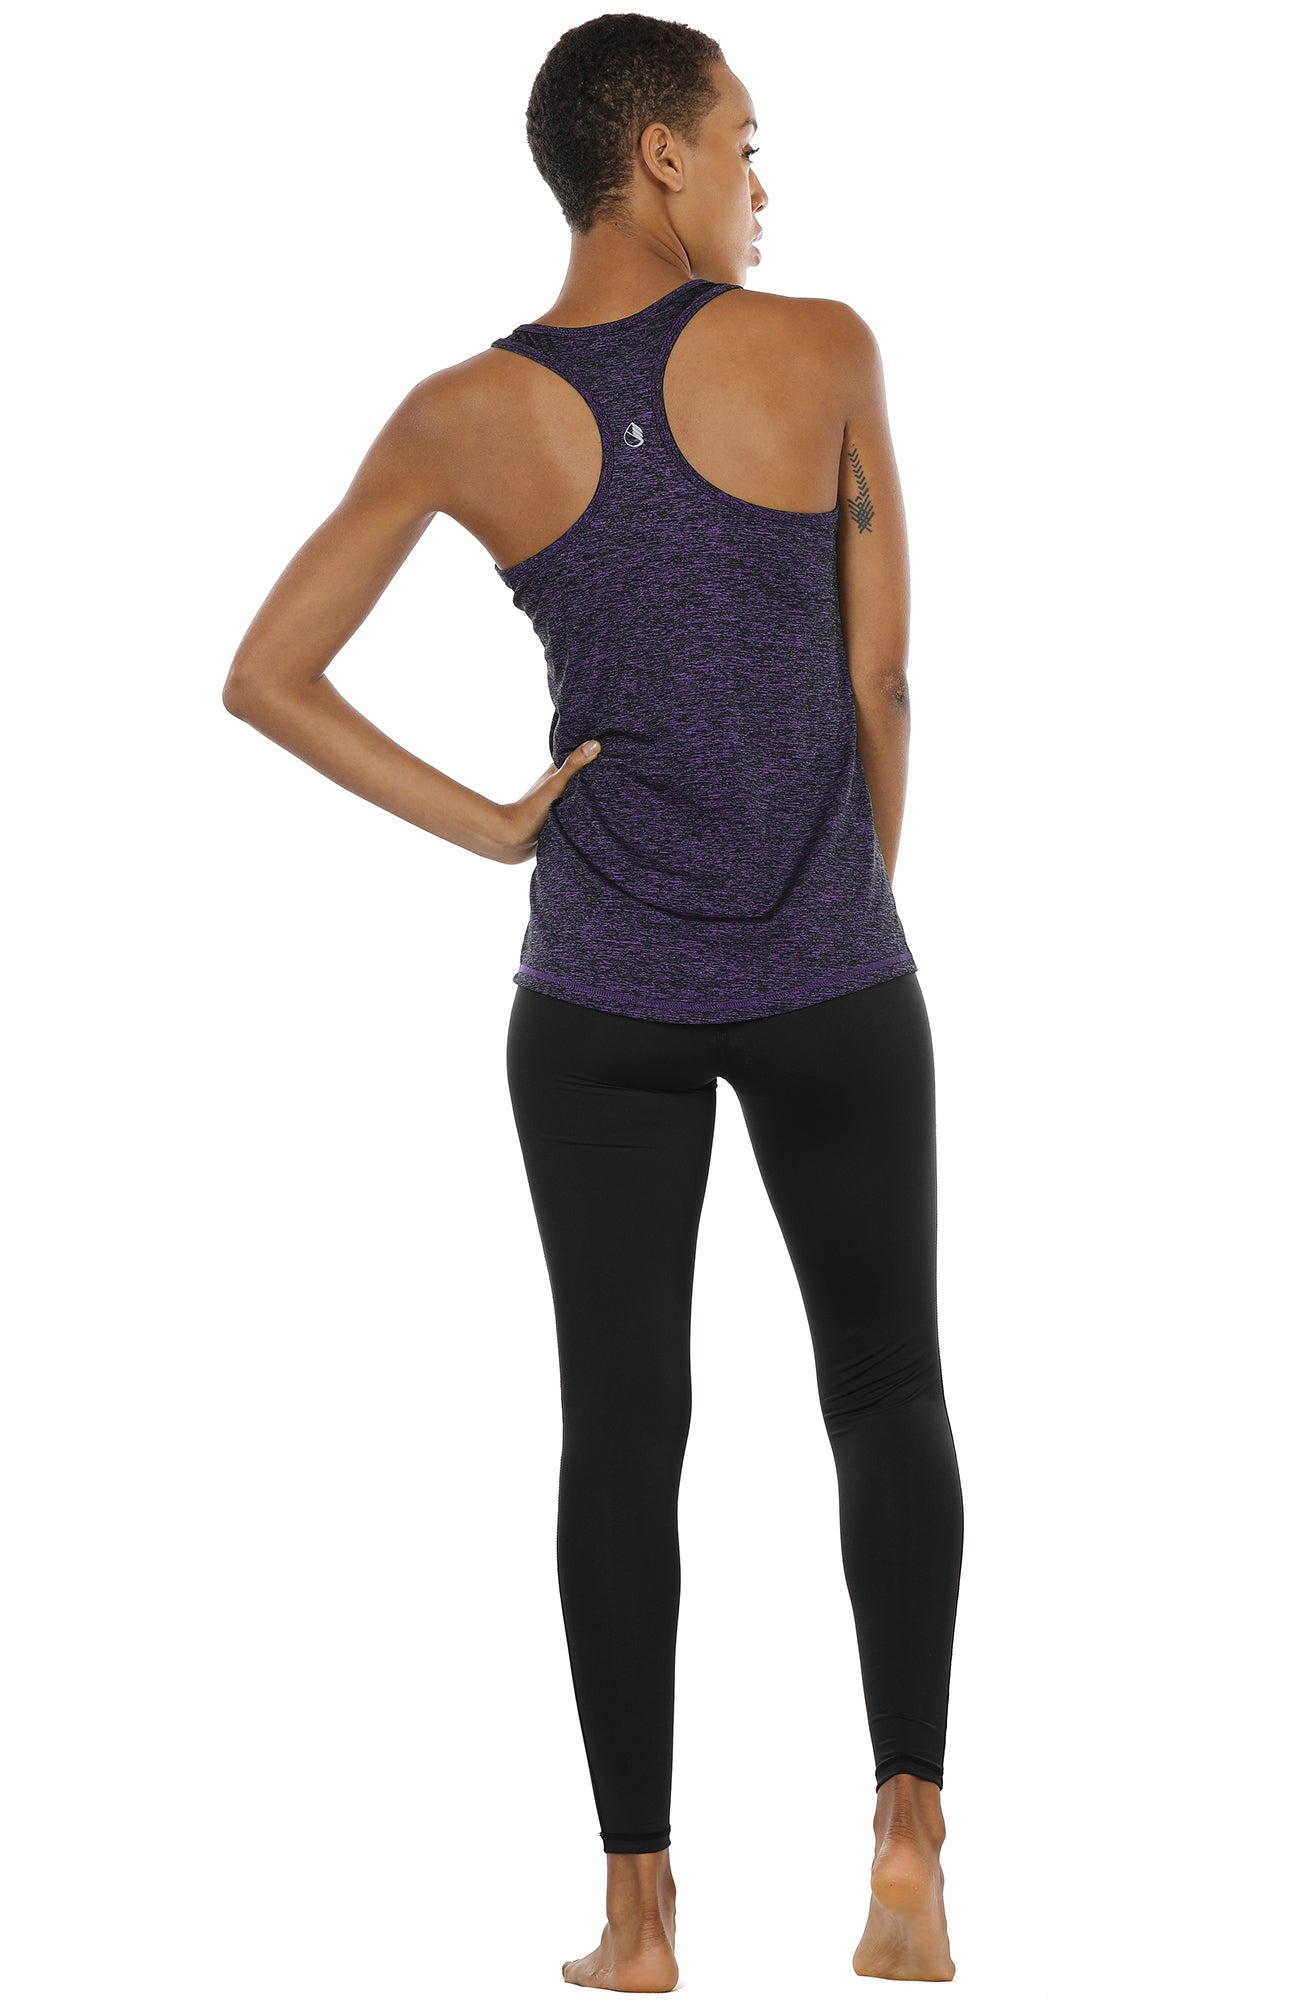 Cosy Pyro Workout Tank Tops for Women Racerback Yoga Tanks Basic Athletic  Activewear-4 Packs